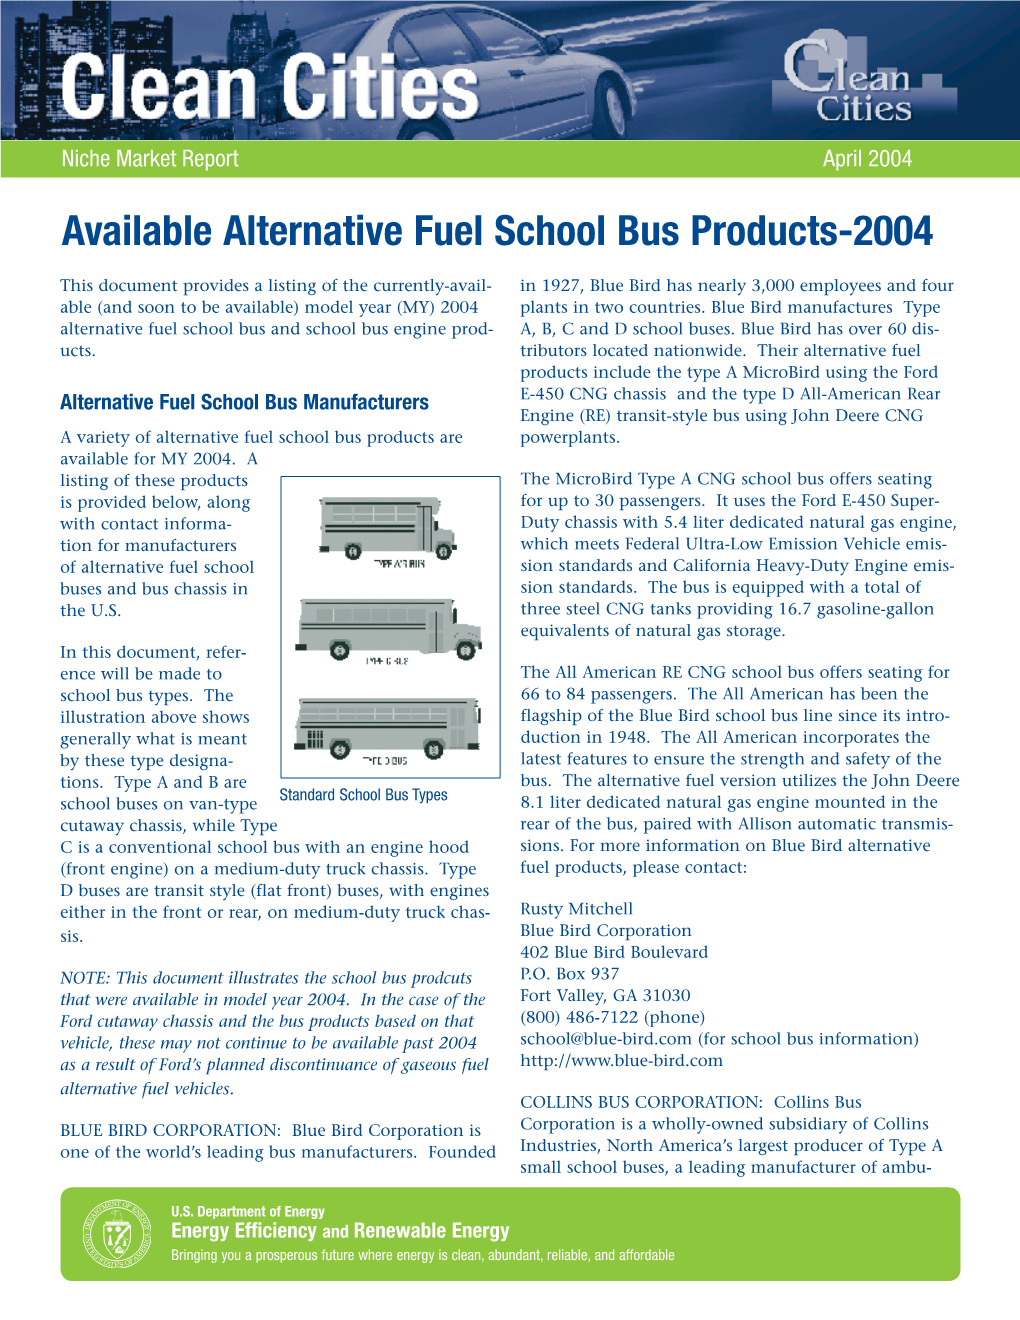 Available Alternative Fuel School Bus Products-2004